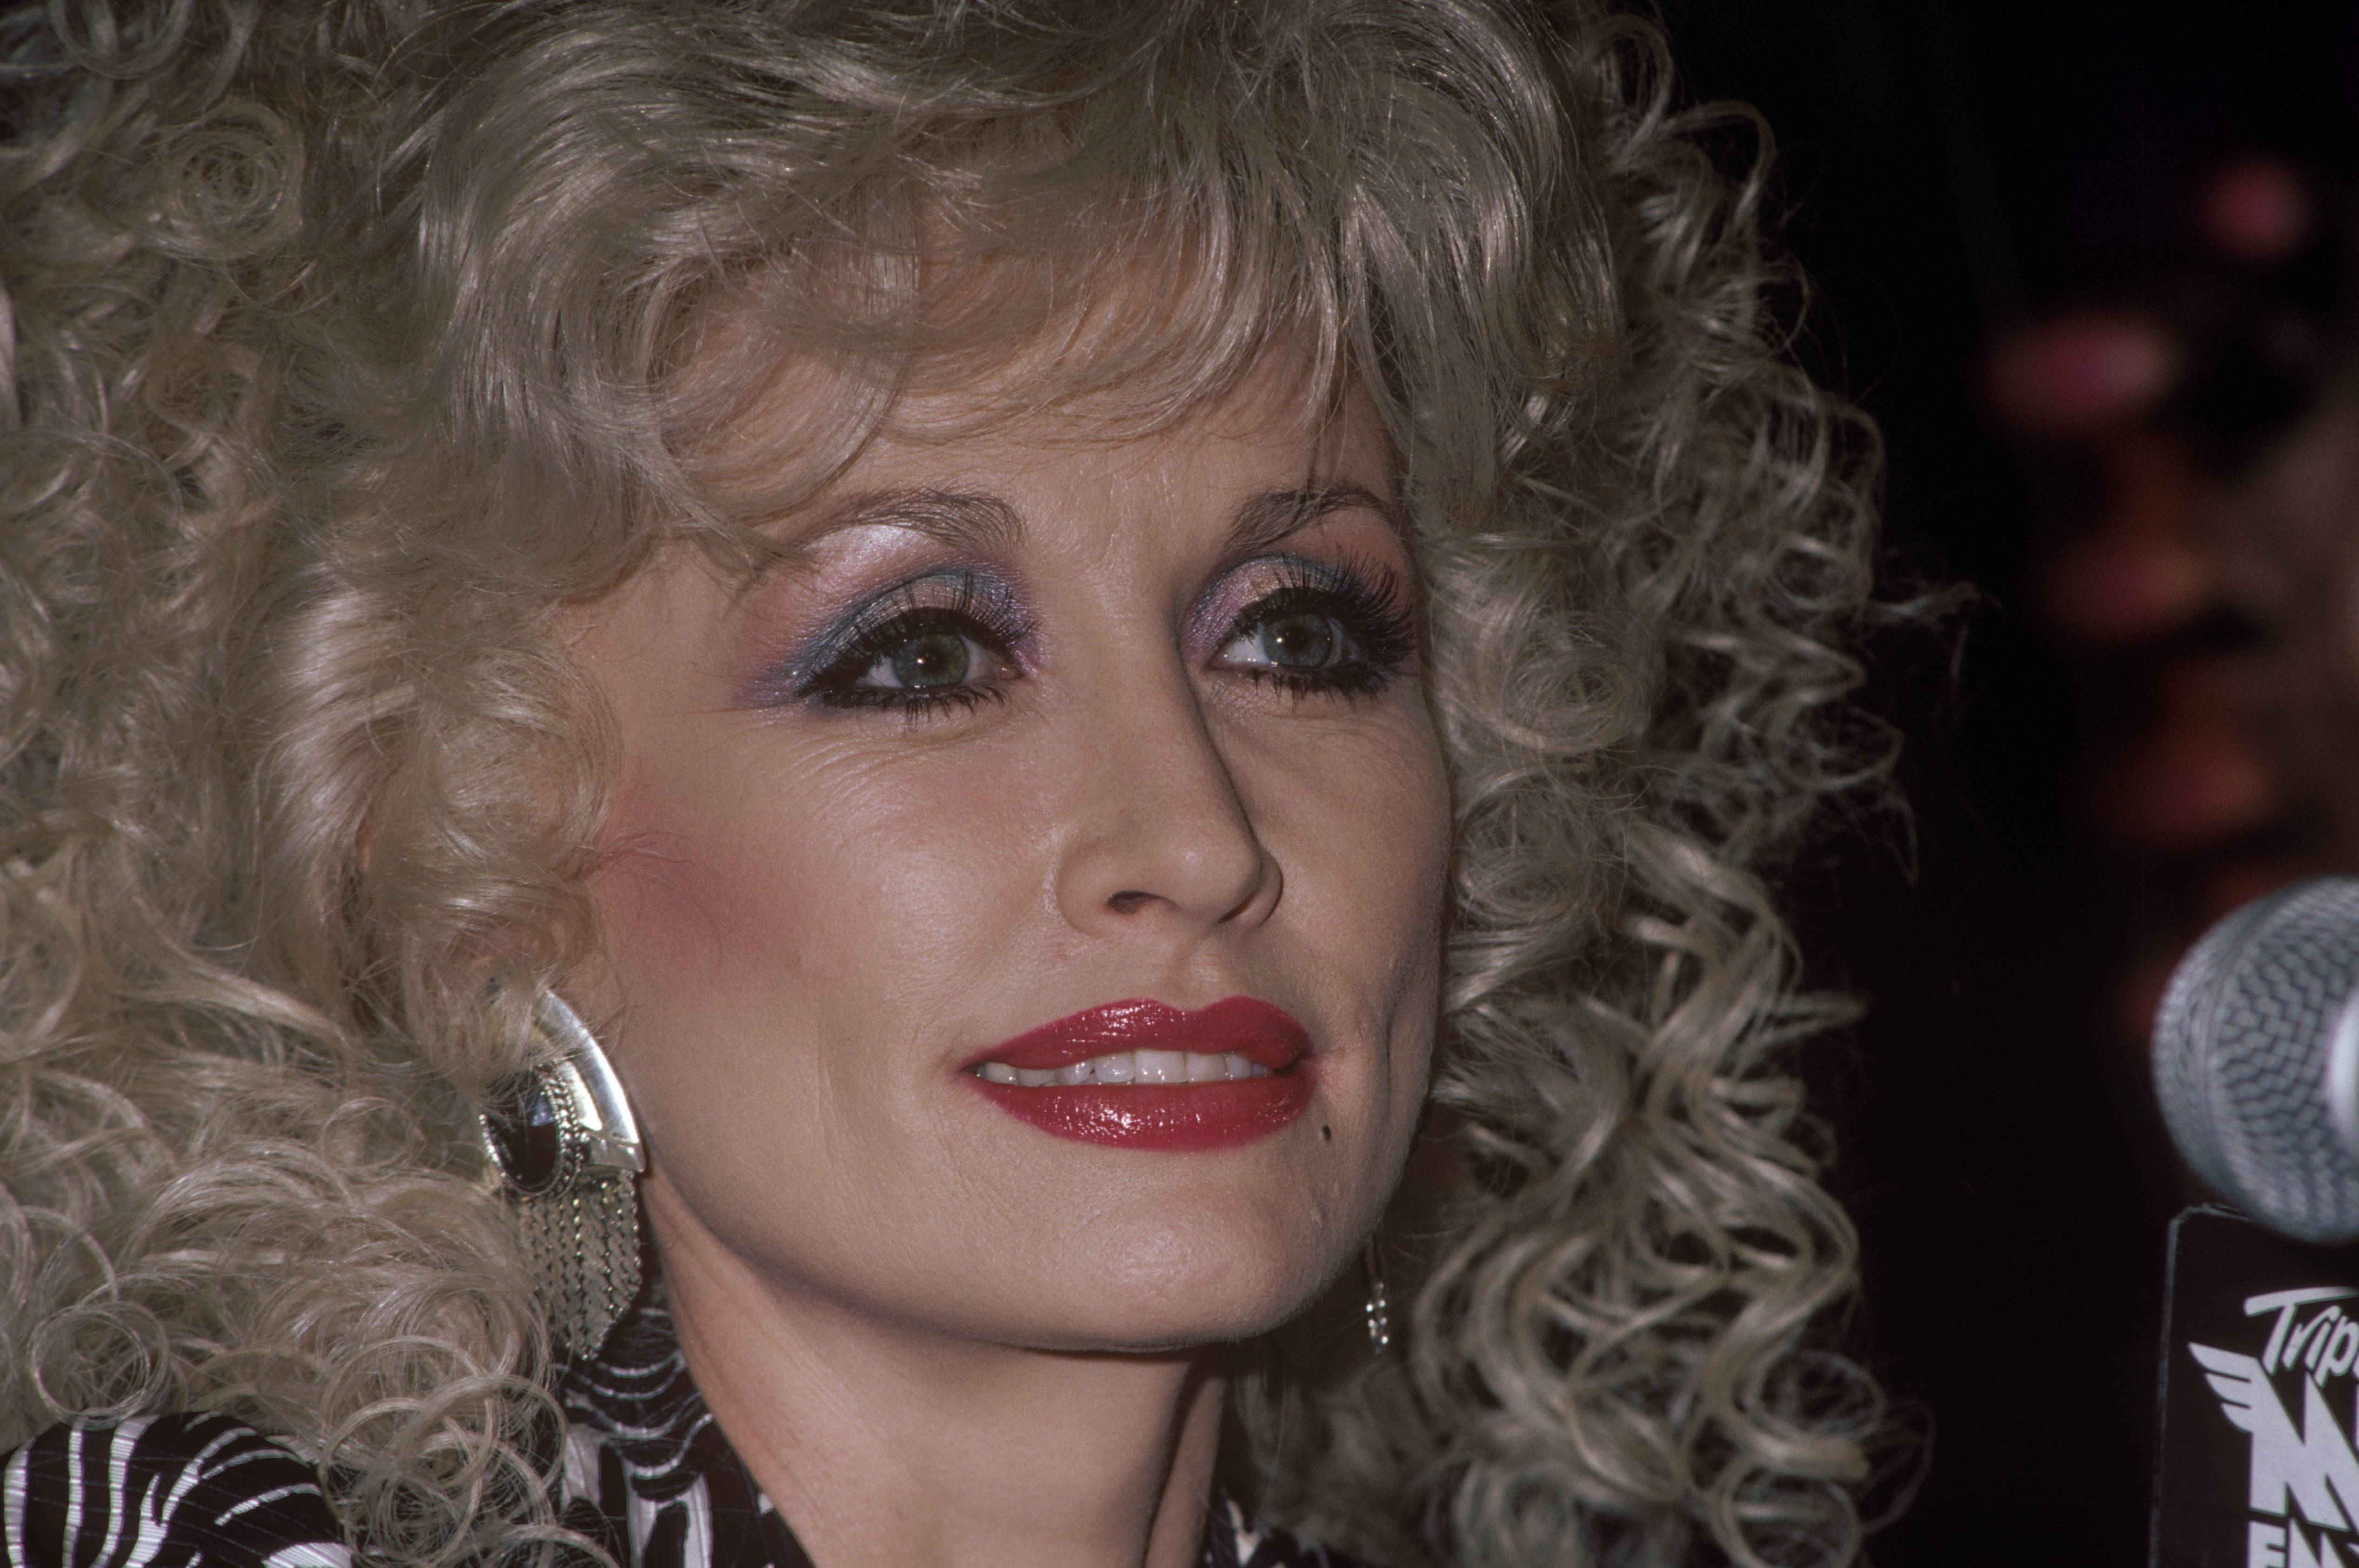 A close-up of Dolly Parton. She has her hair and makeup done in the style of the '80s.